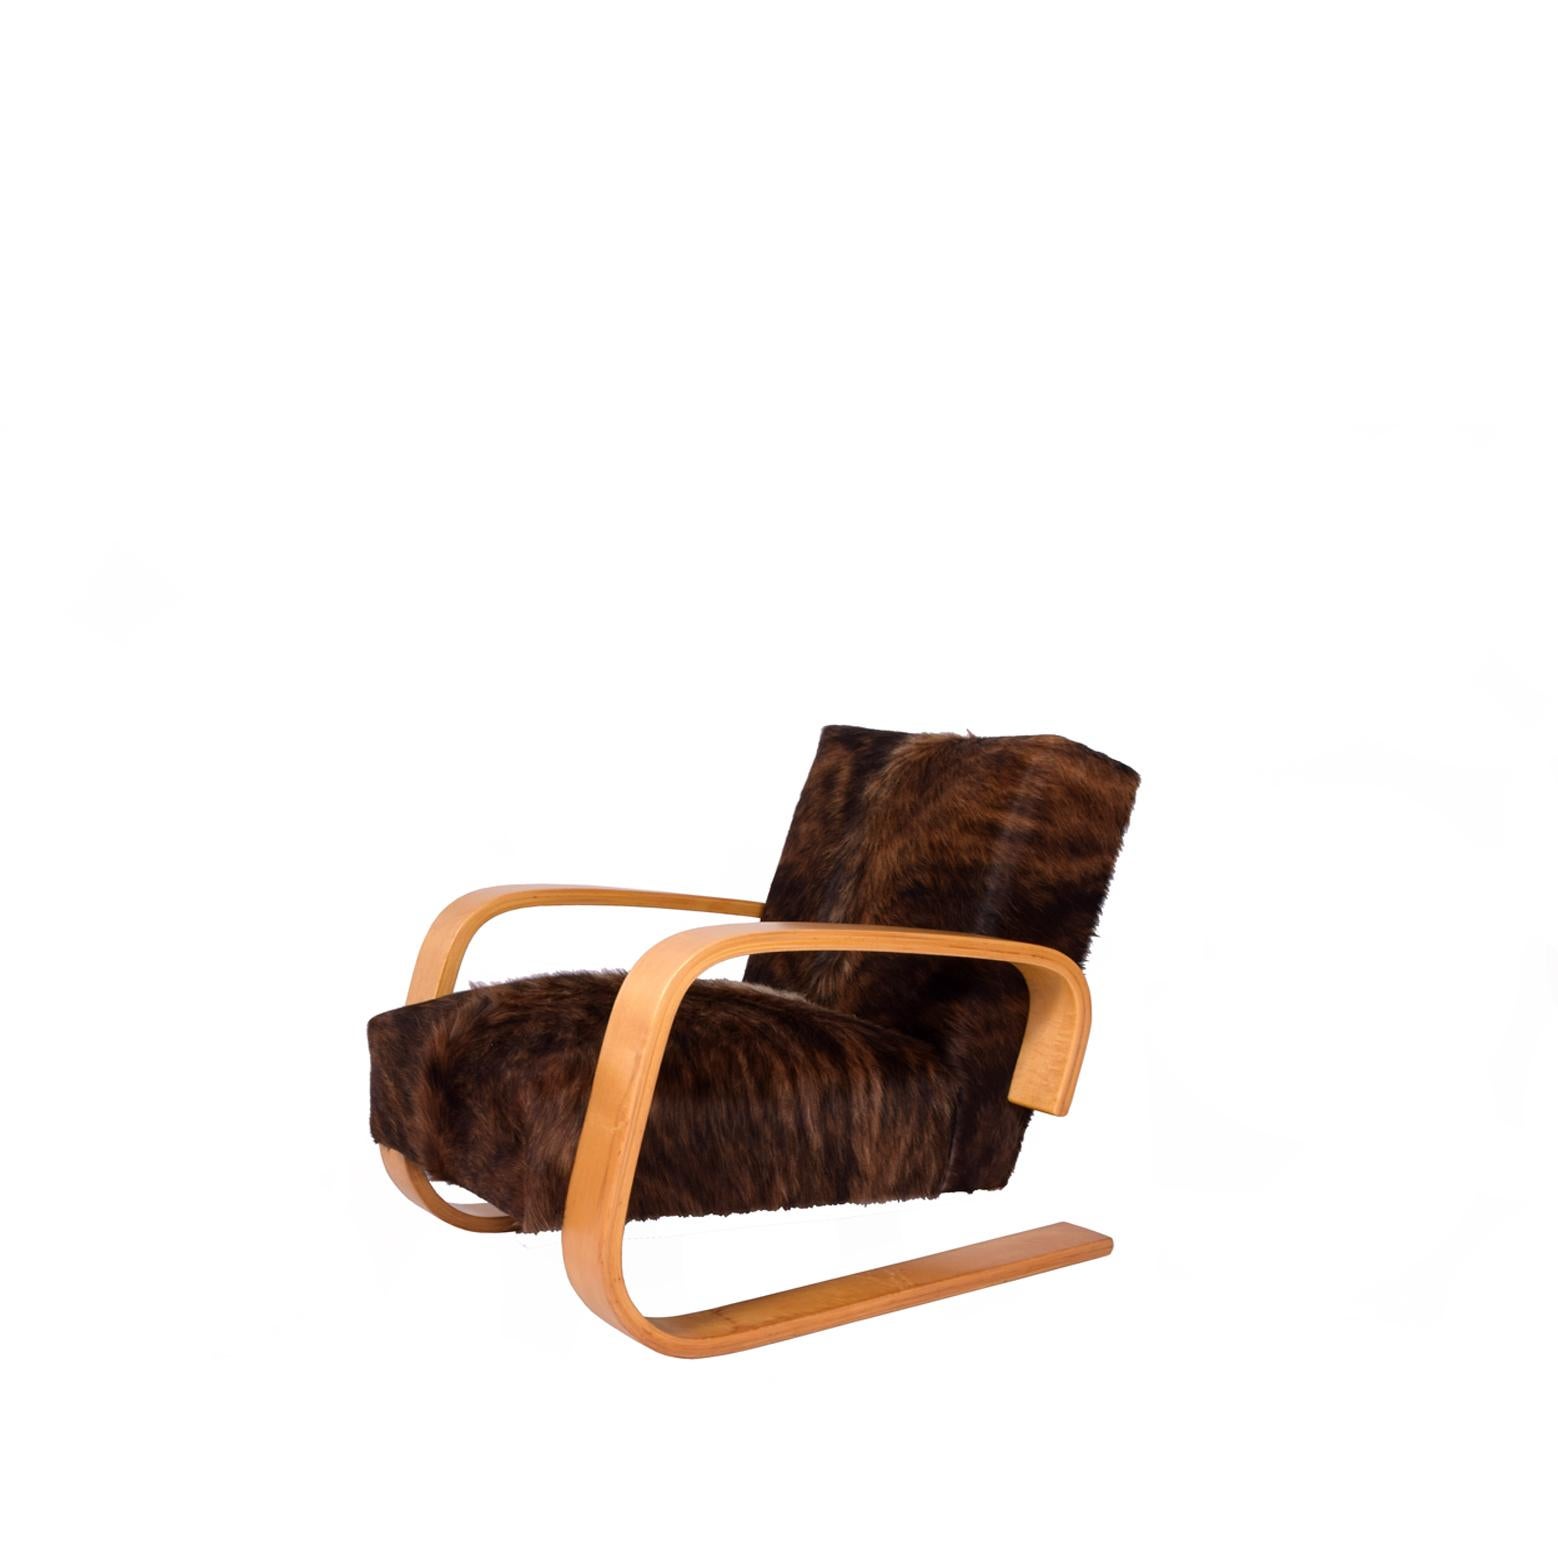 Early tank chair with birch arms and spring construction seat and back. Reupholstered in cowhide. Made by Artek in Sweden. This chair was produced between 1940 and 1955.